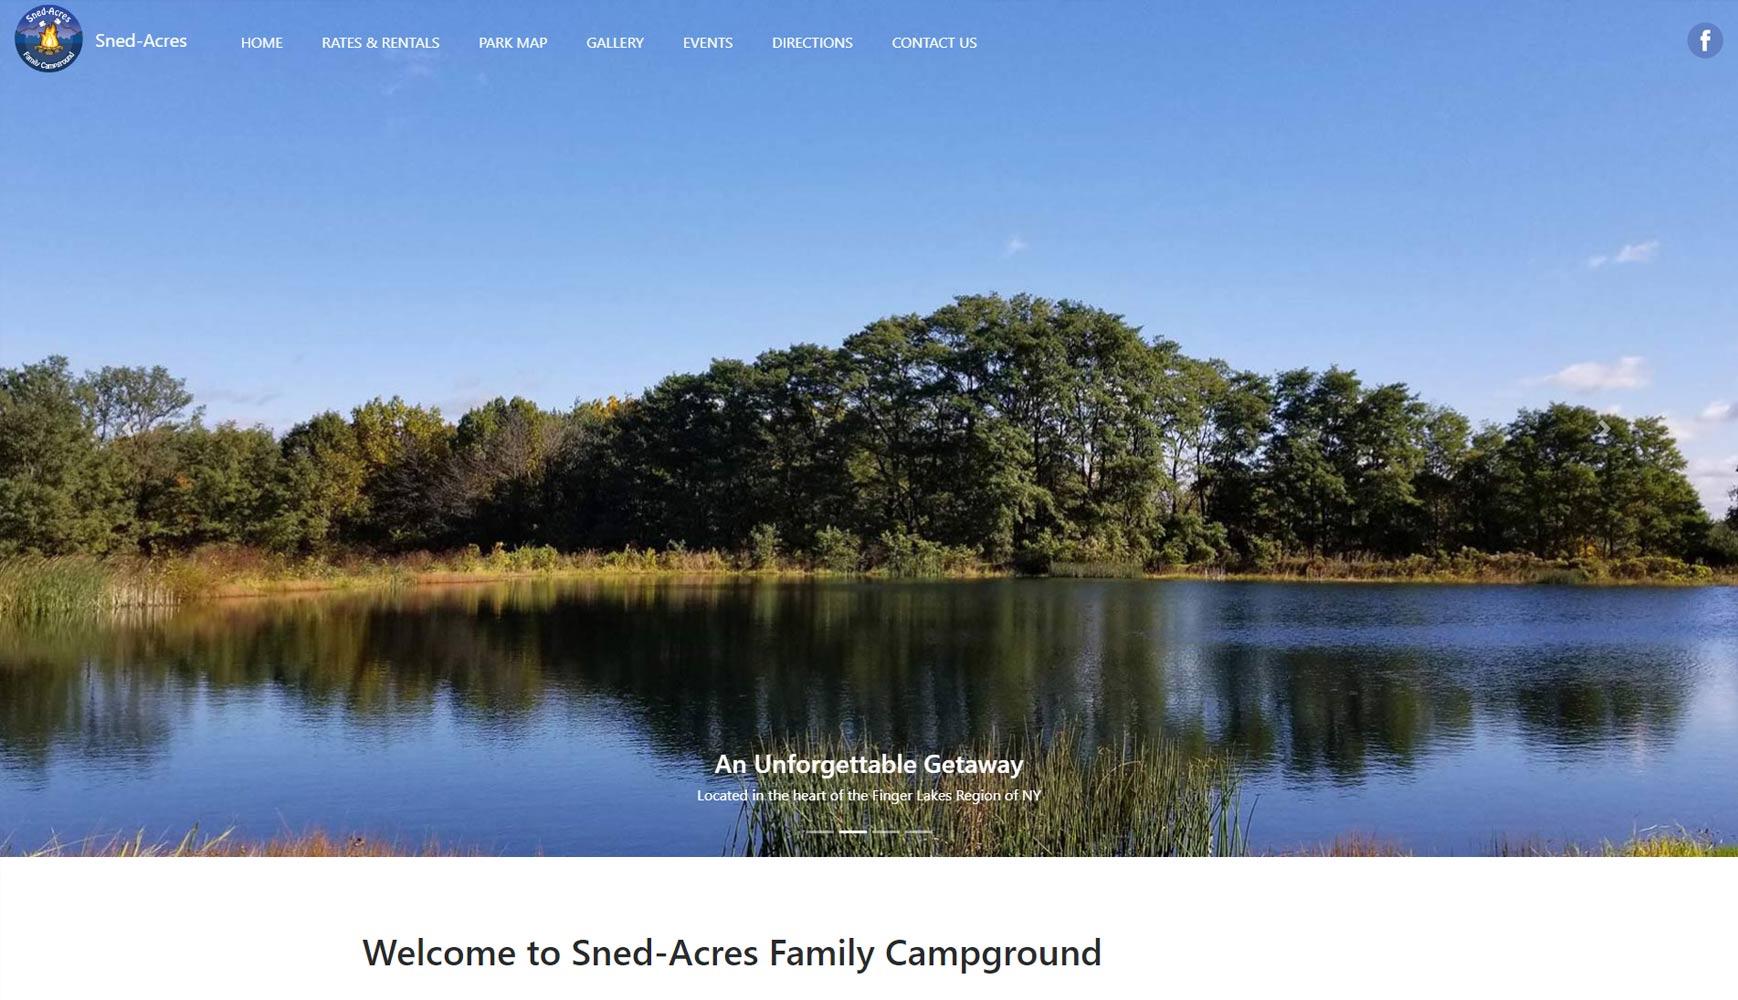 Sned-Acres Family Campground